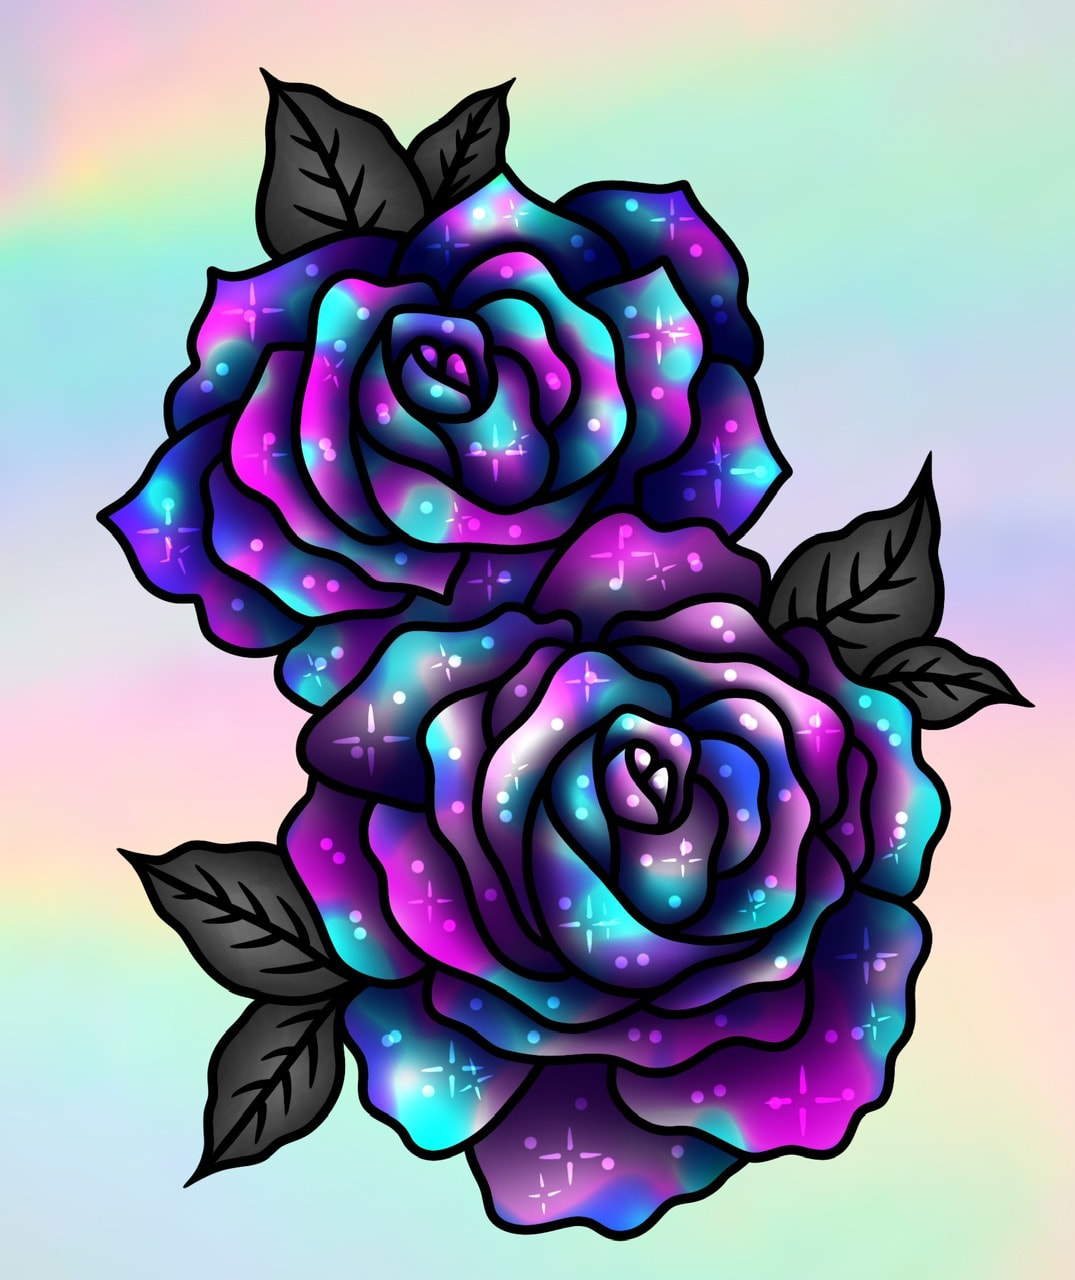 Purple and blue galactic roses tattoo design.